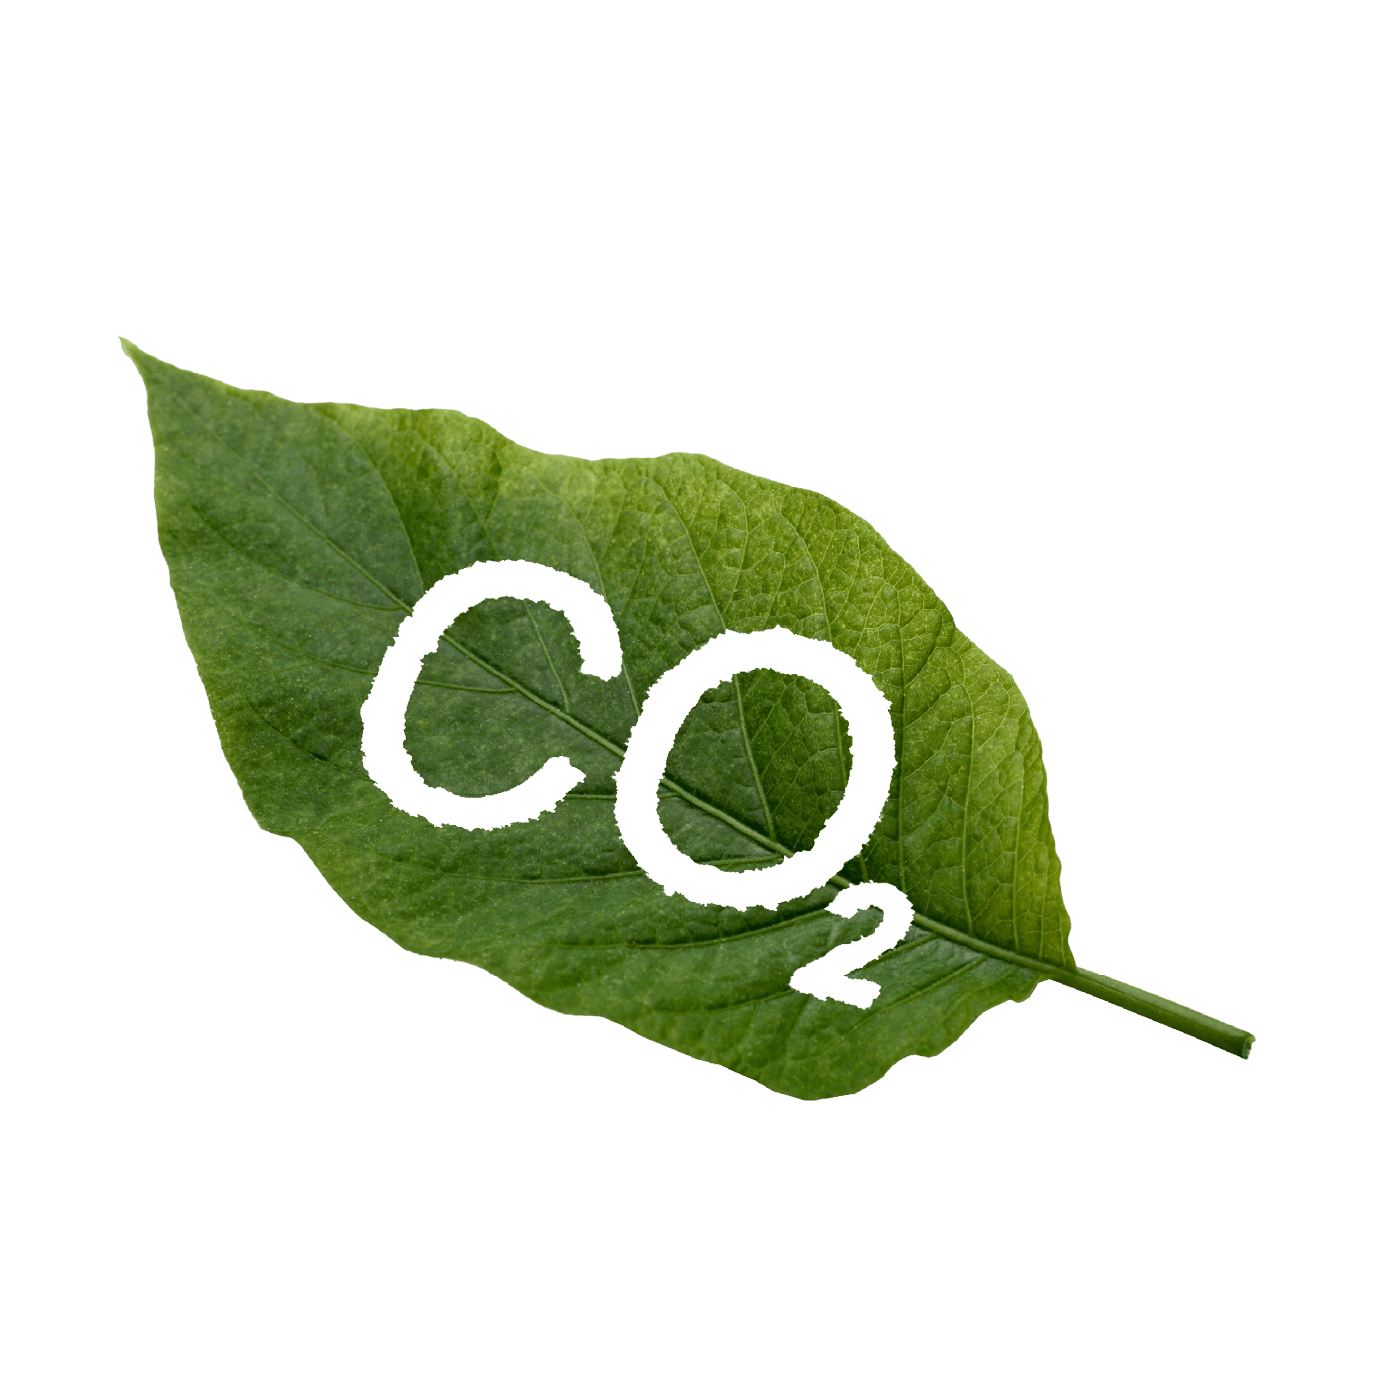 green leaf on white background, with CO2 for Carbon Dioxide cut out, illustrating the function of plants to process CO2